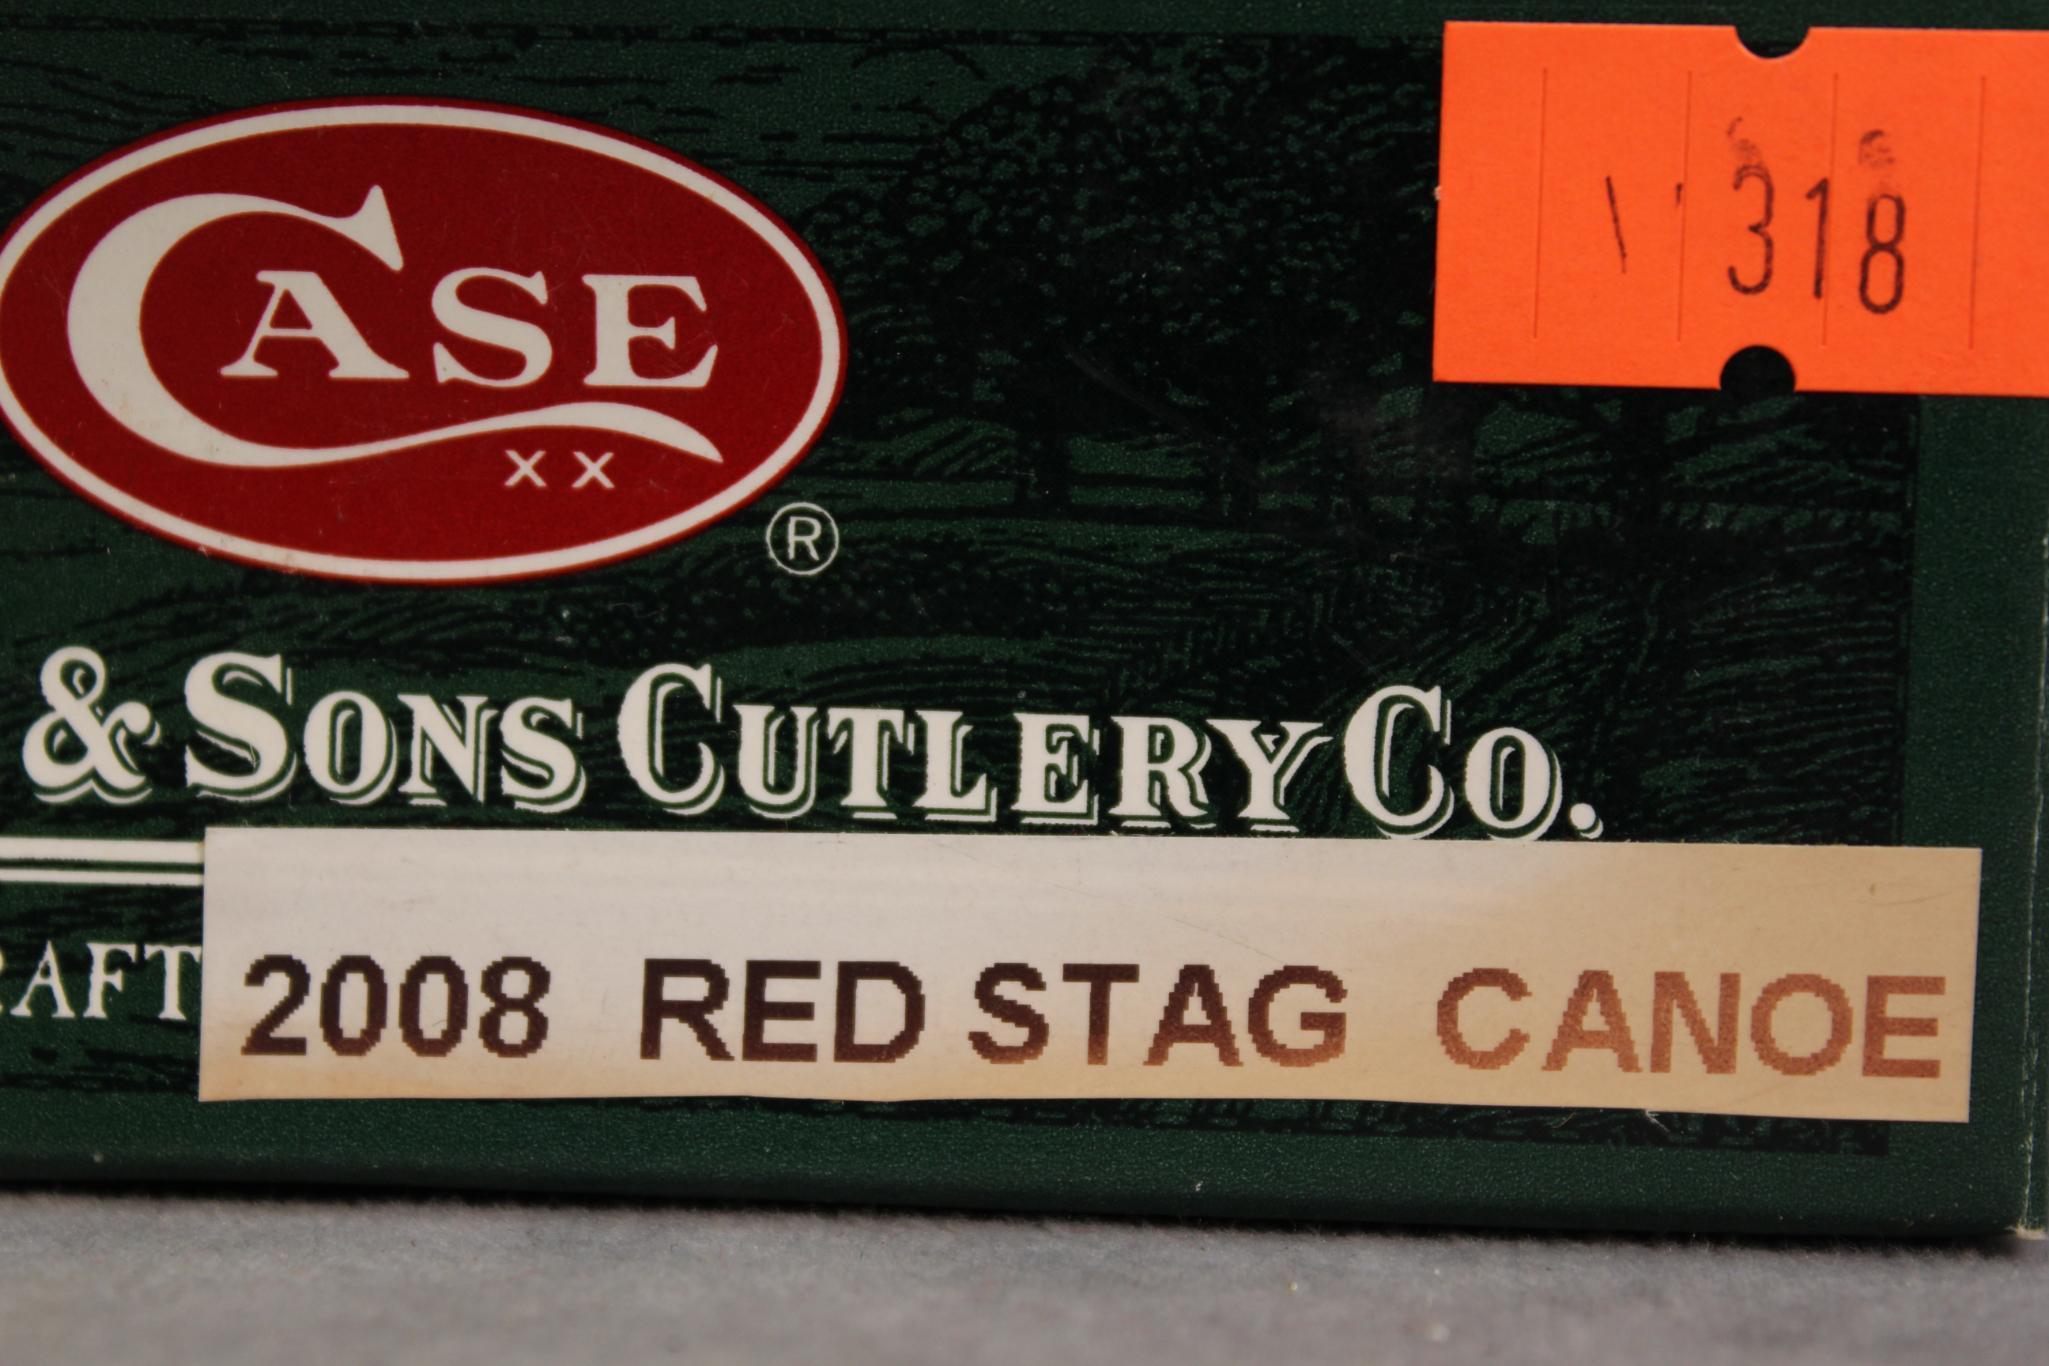 2008 RED STAG CANOE R52131 SS